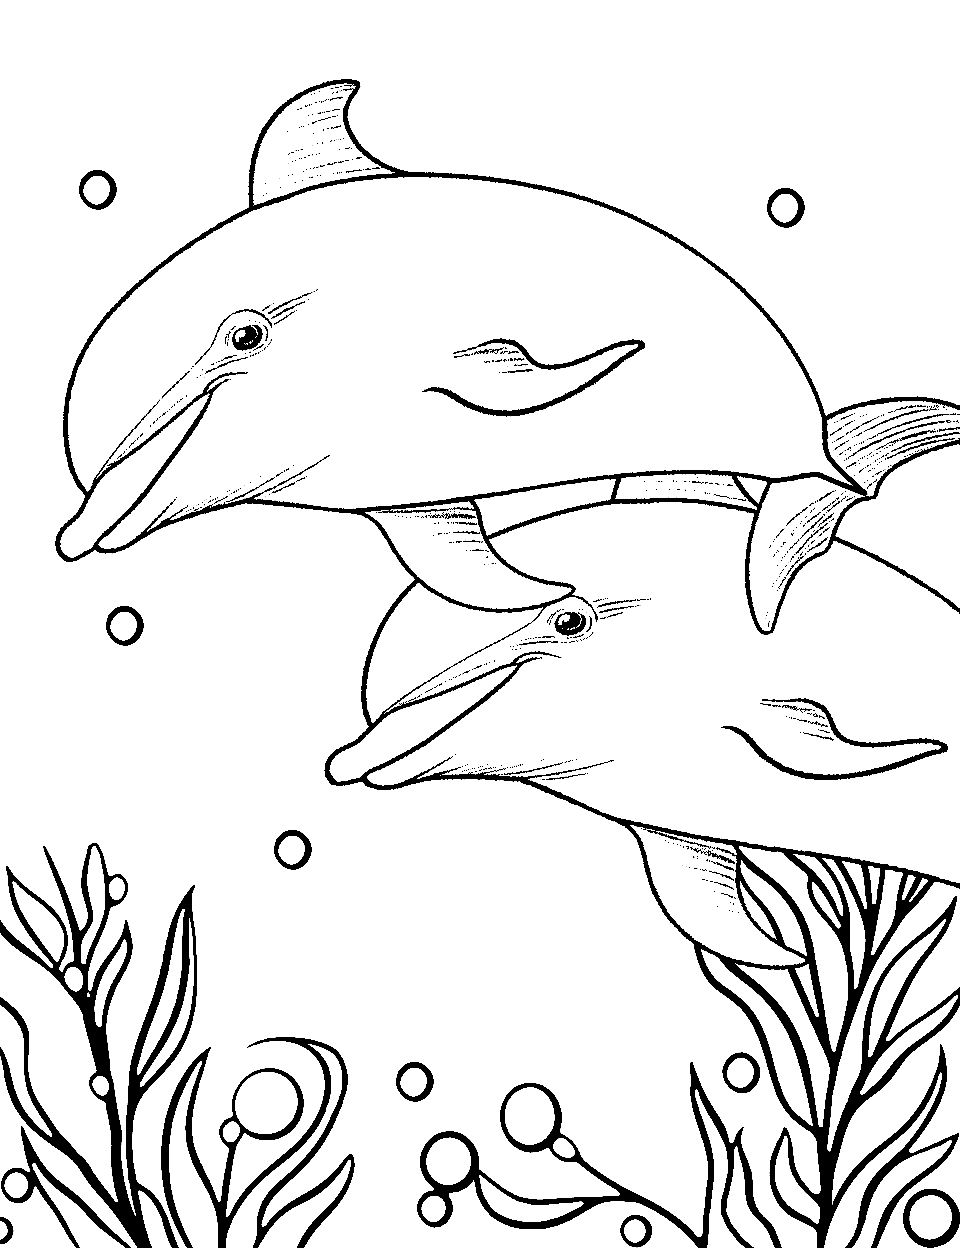 Joyful Dolphin Race Coloring Page - Two dolphins energetically racing through the open, friendly ocean.